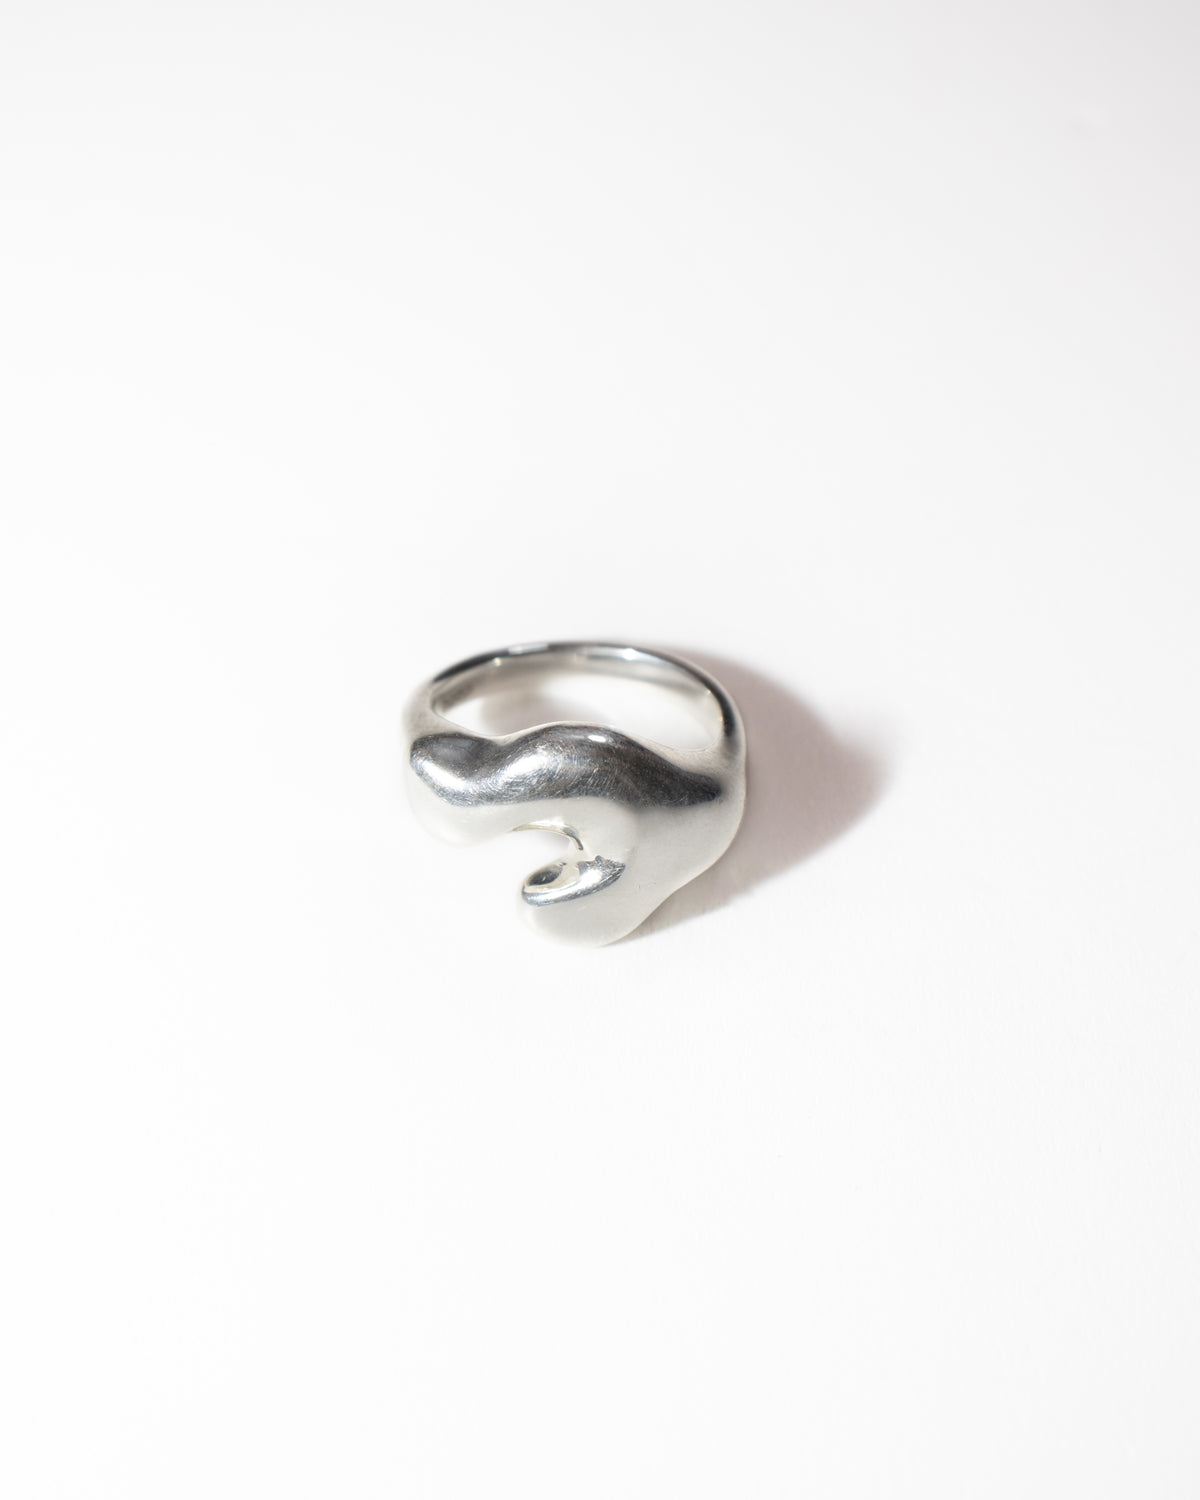 inoop claw ring silver925 リング